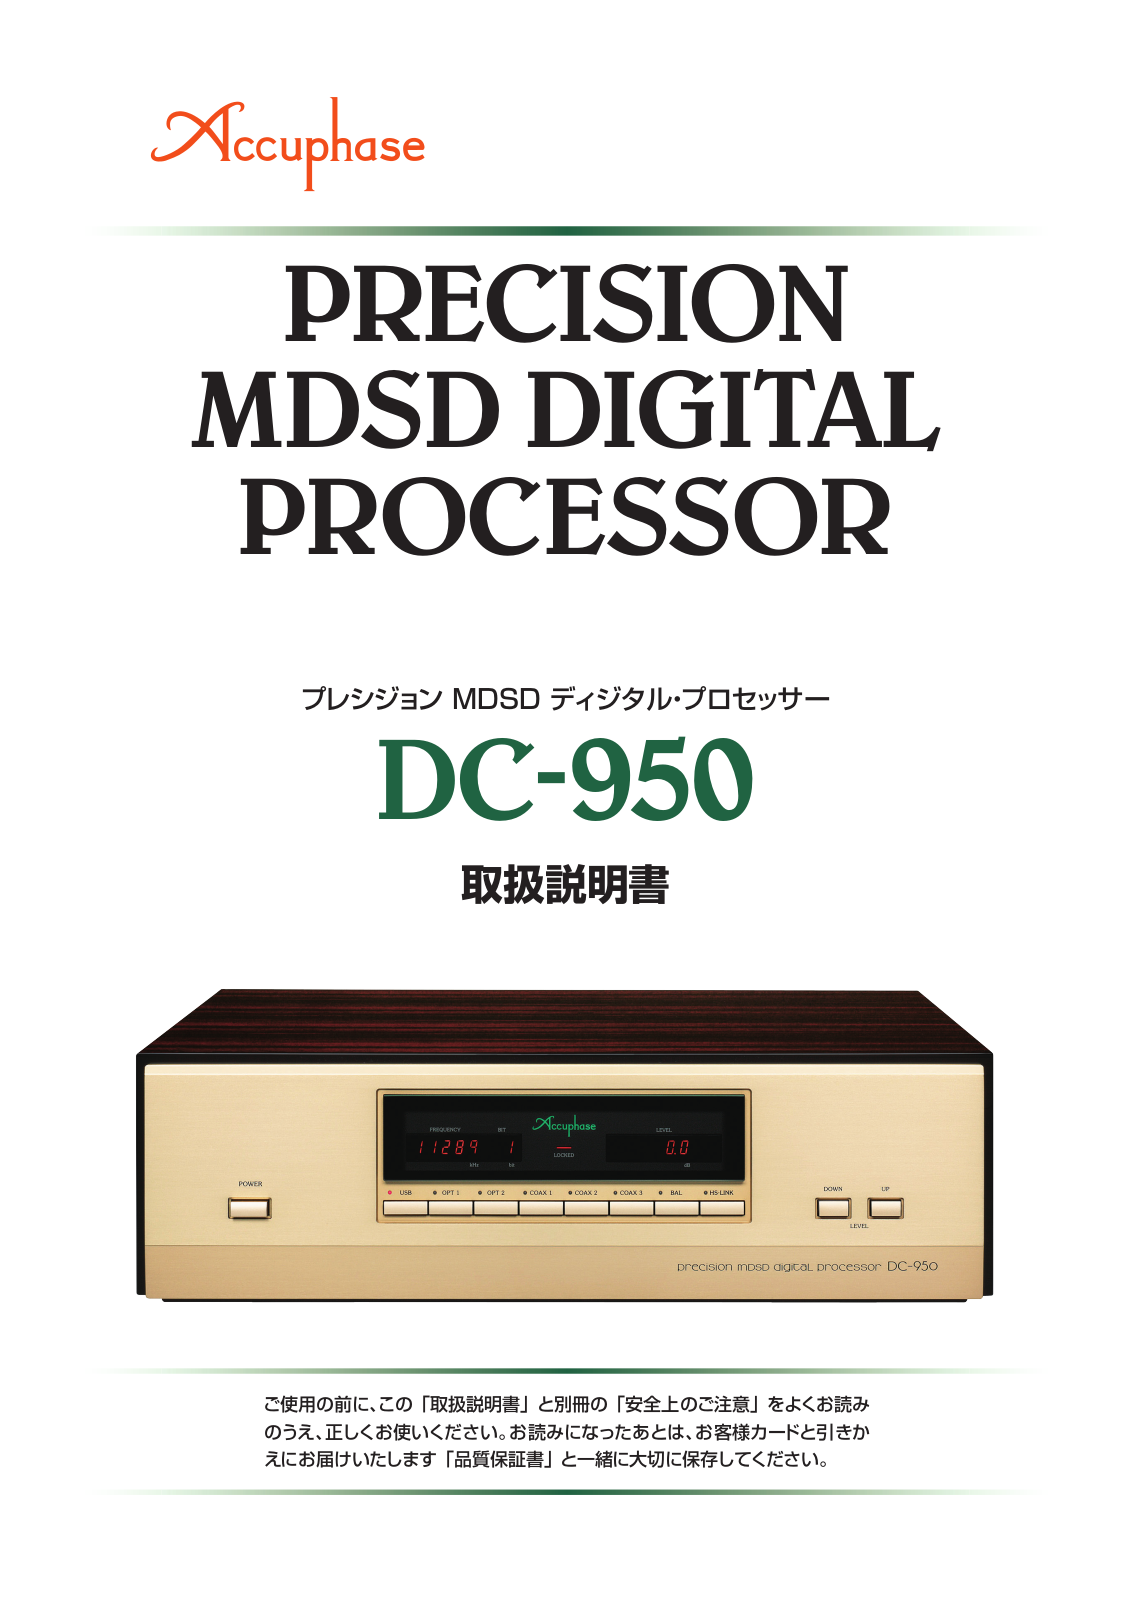 Accuphase DC-950 instruction manual